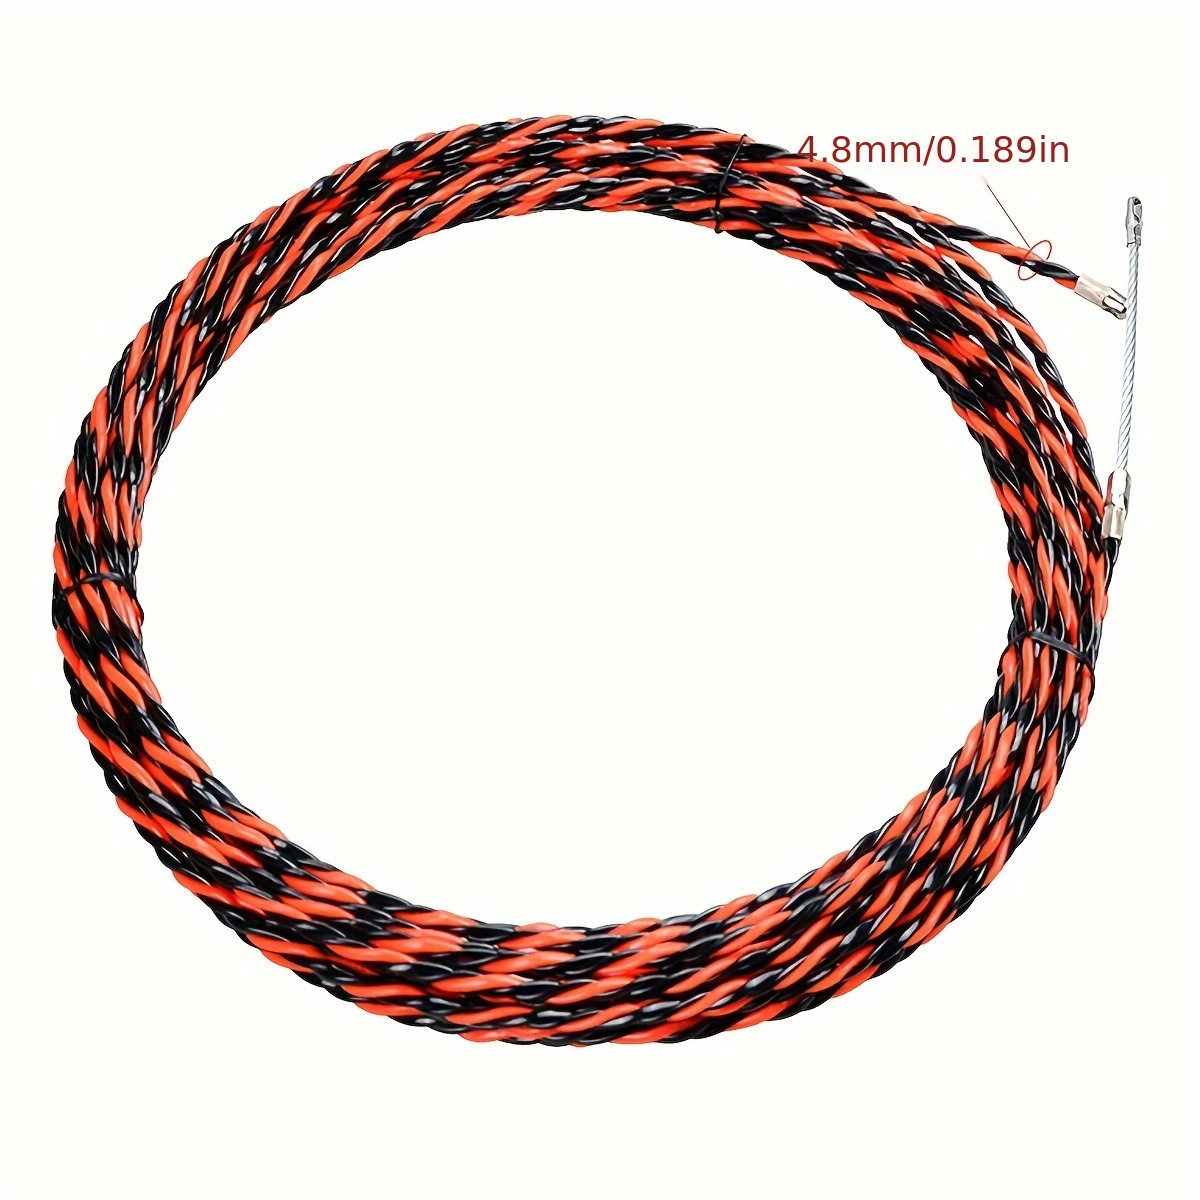 15M Fish Tape Electrical Cable Running Rods, Electrical Wire